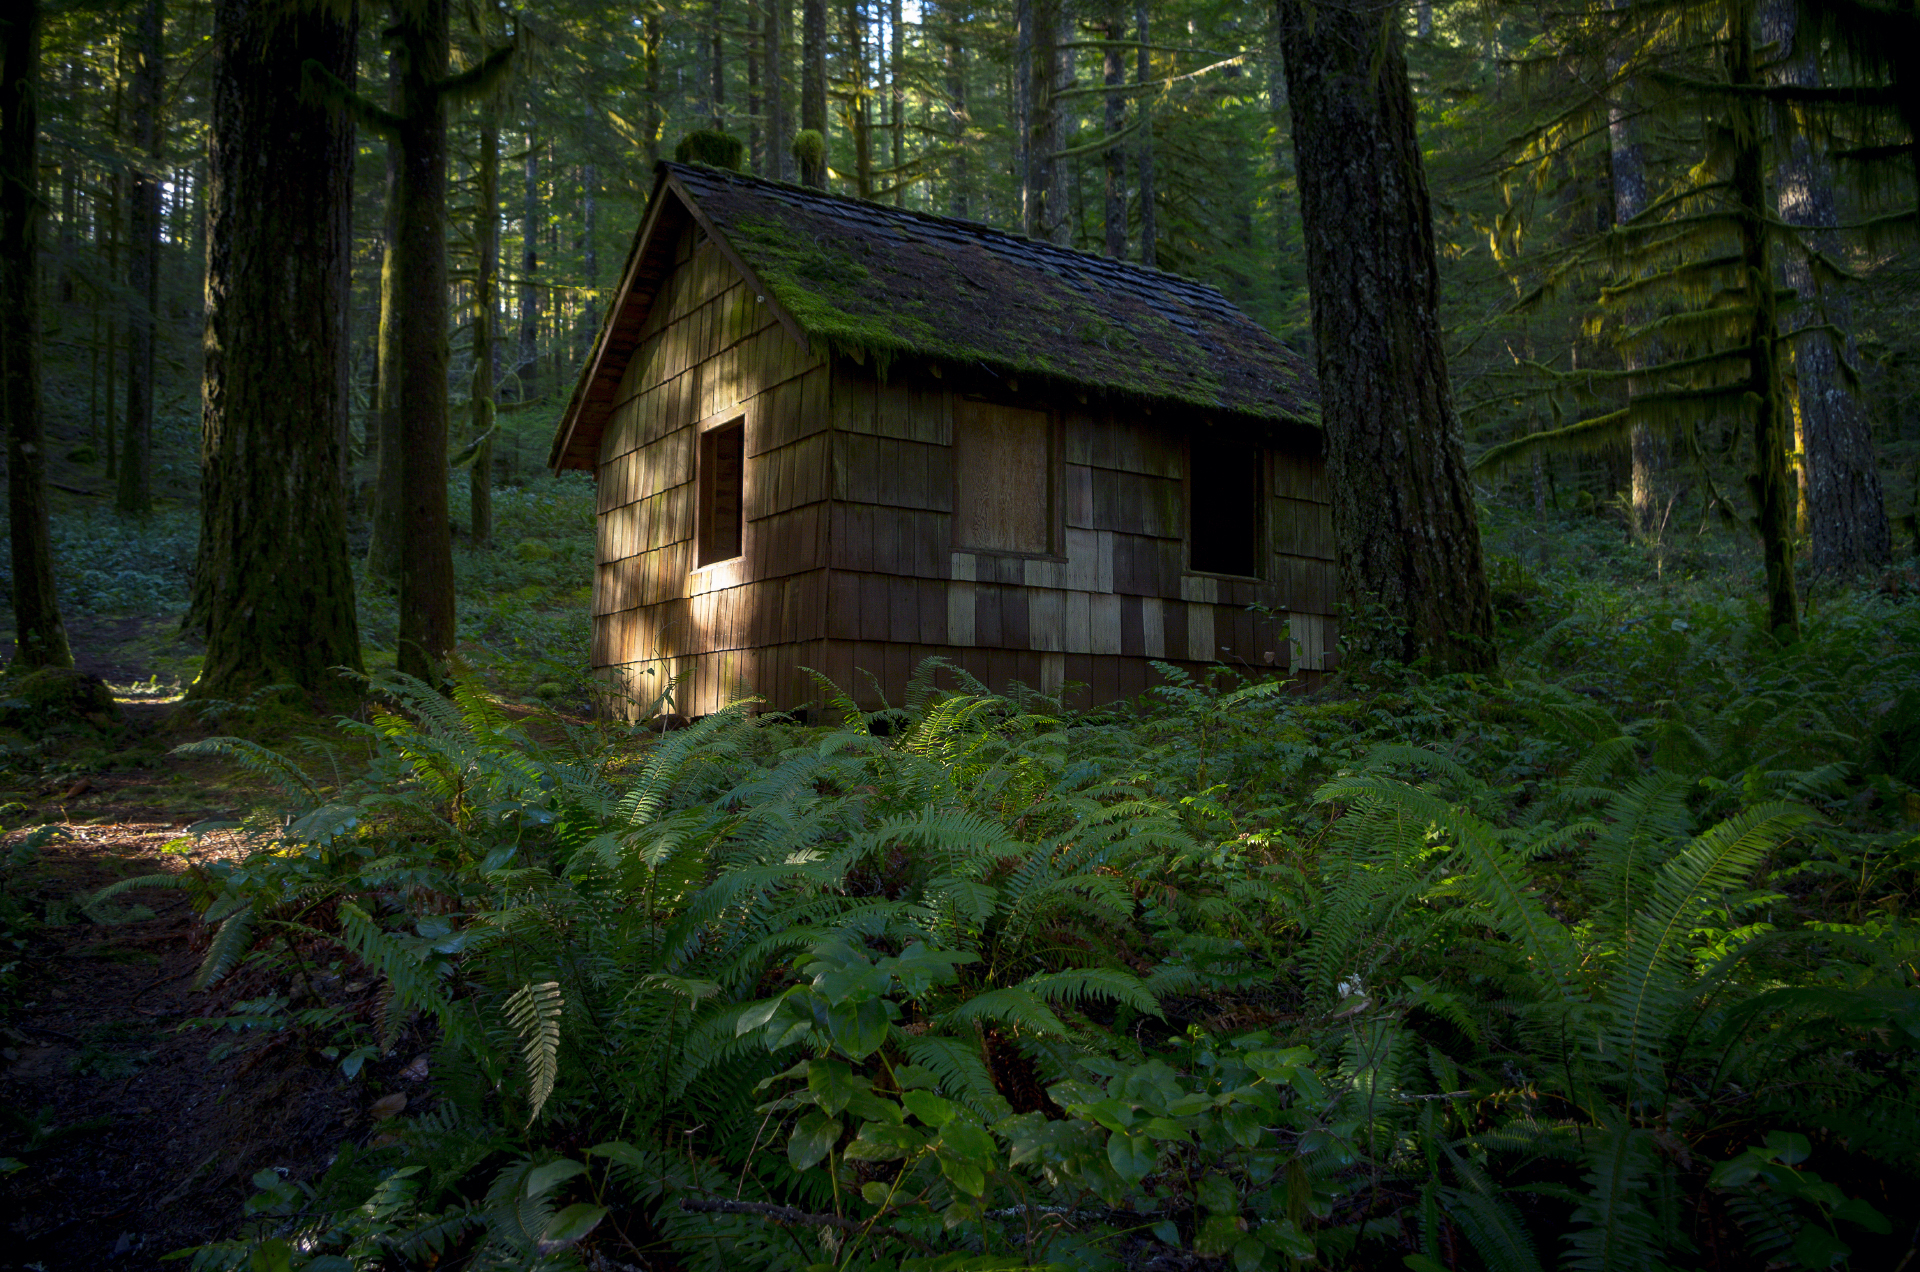 a small wooden shack in the middle of a forest